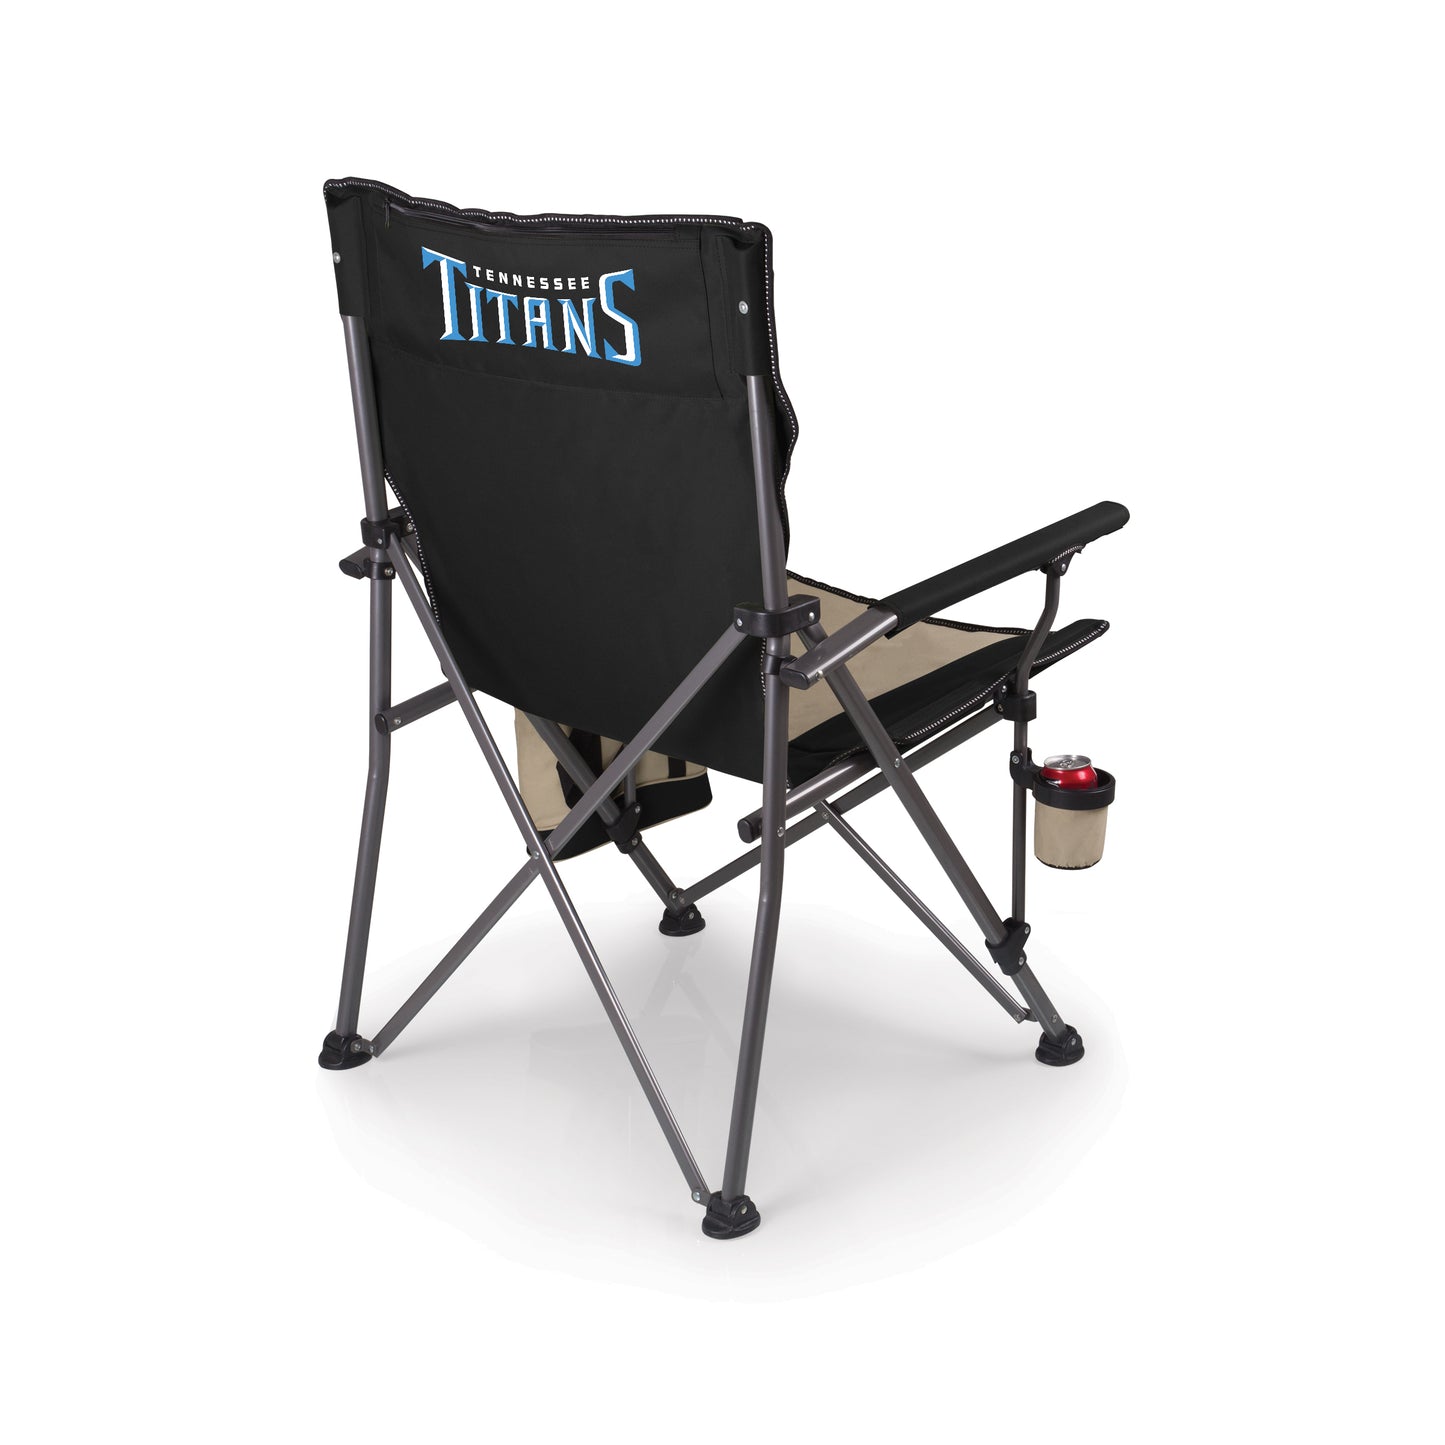 Tennessee Titans - Big Bear XL Camp Chair with Cooler